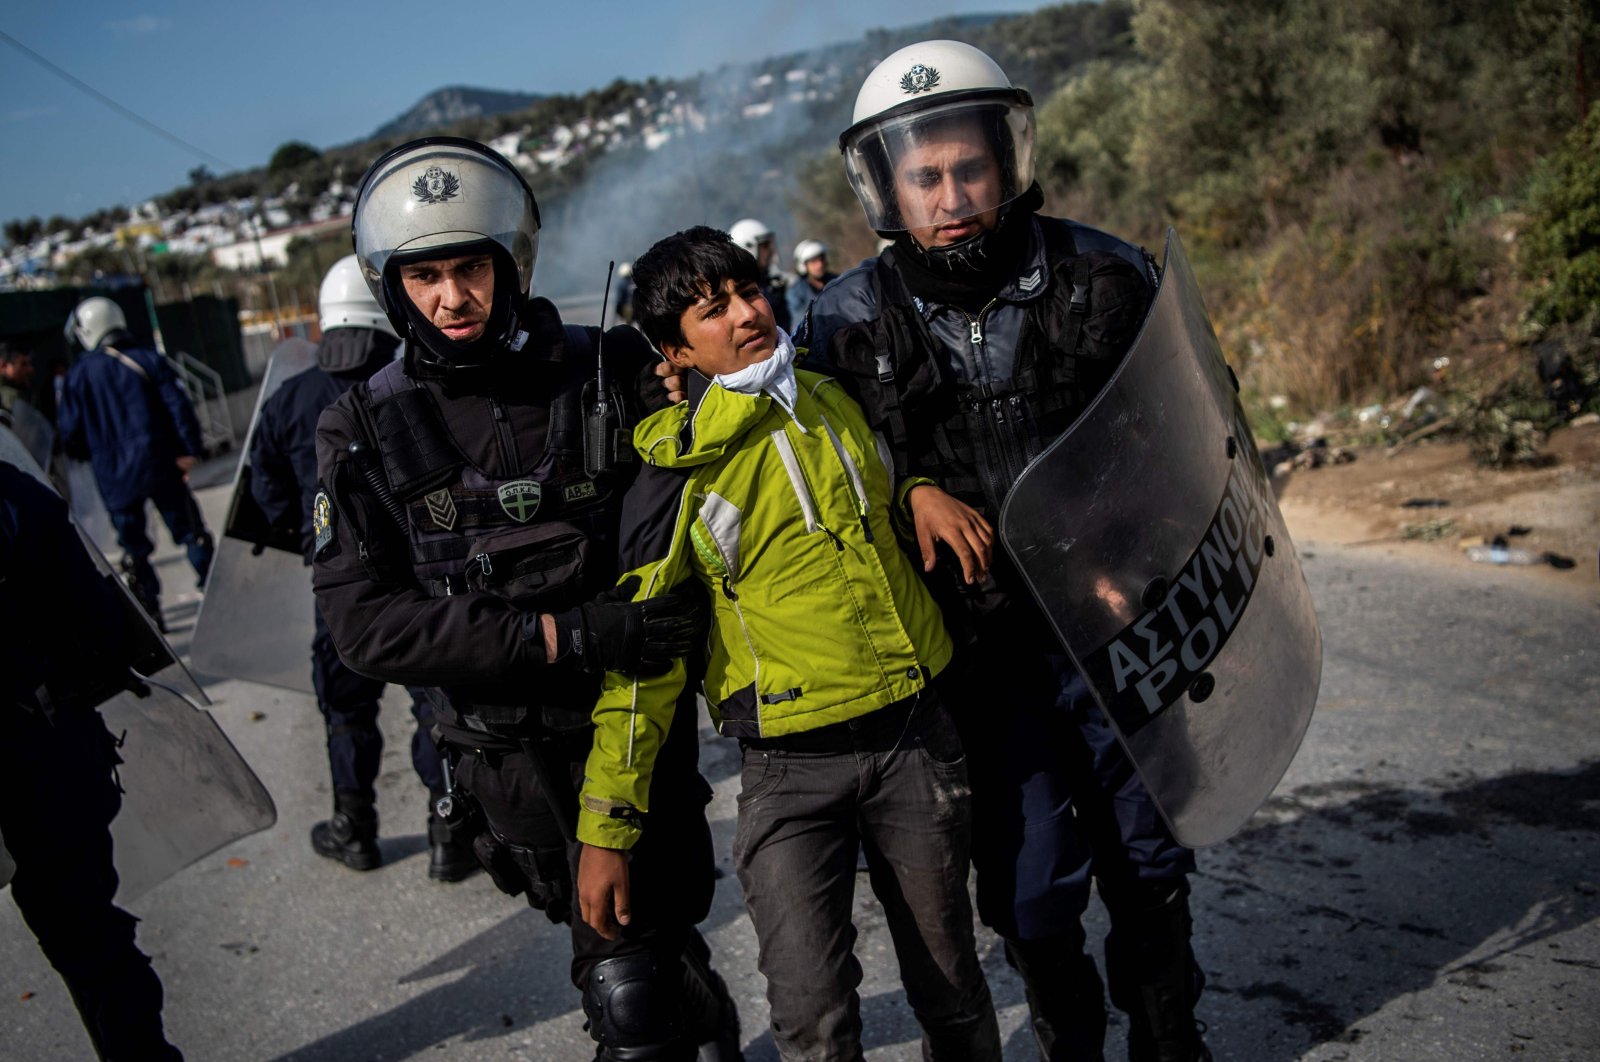 Riot police detain a migrant during clashes near the Moria camp for refugees and migrants, on the island of Lesbos, on March 2, 2020. (AFP Photo)